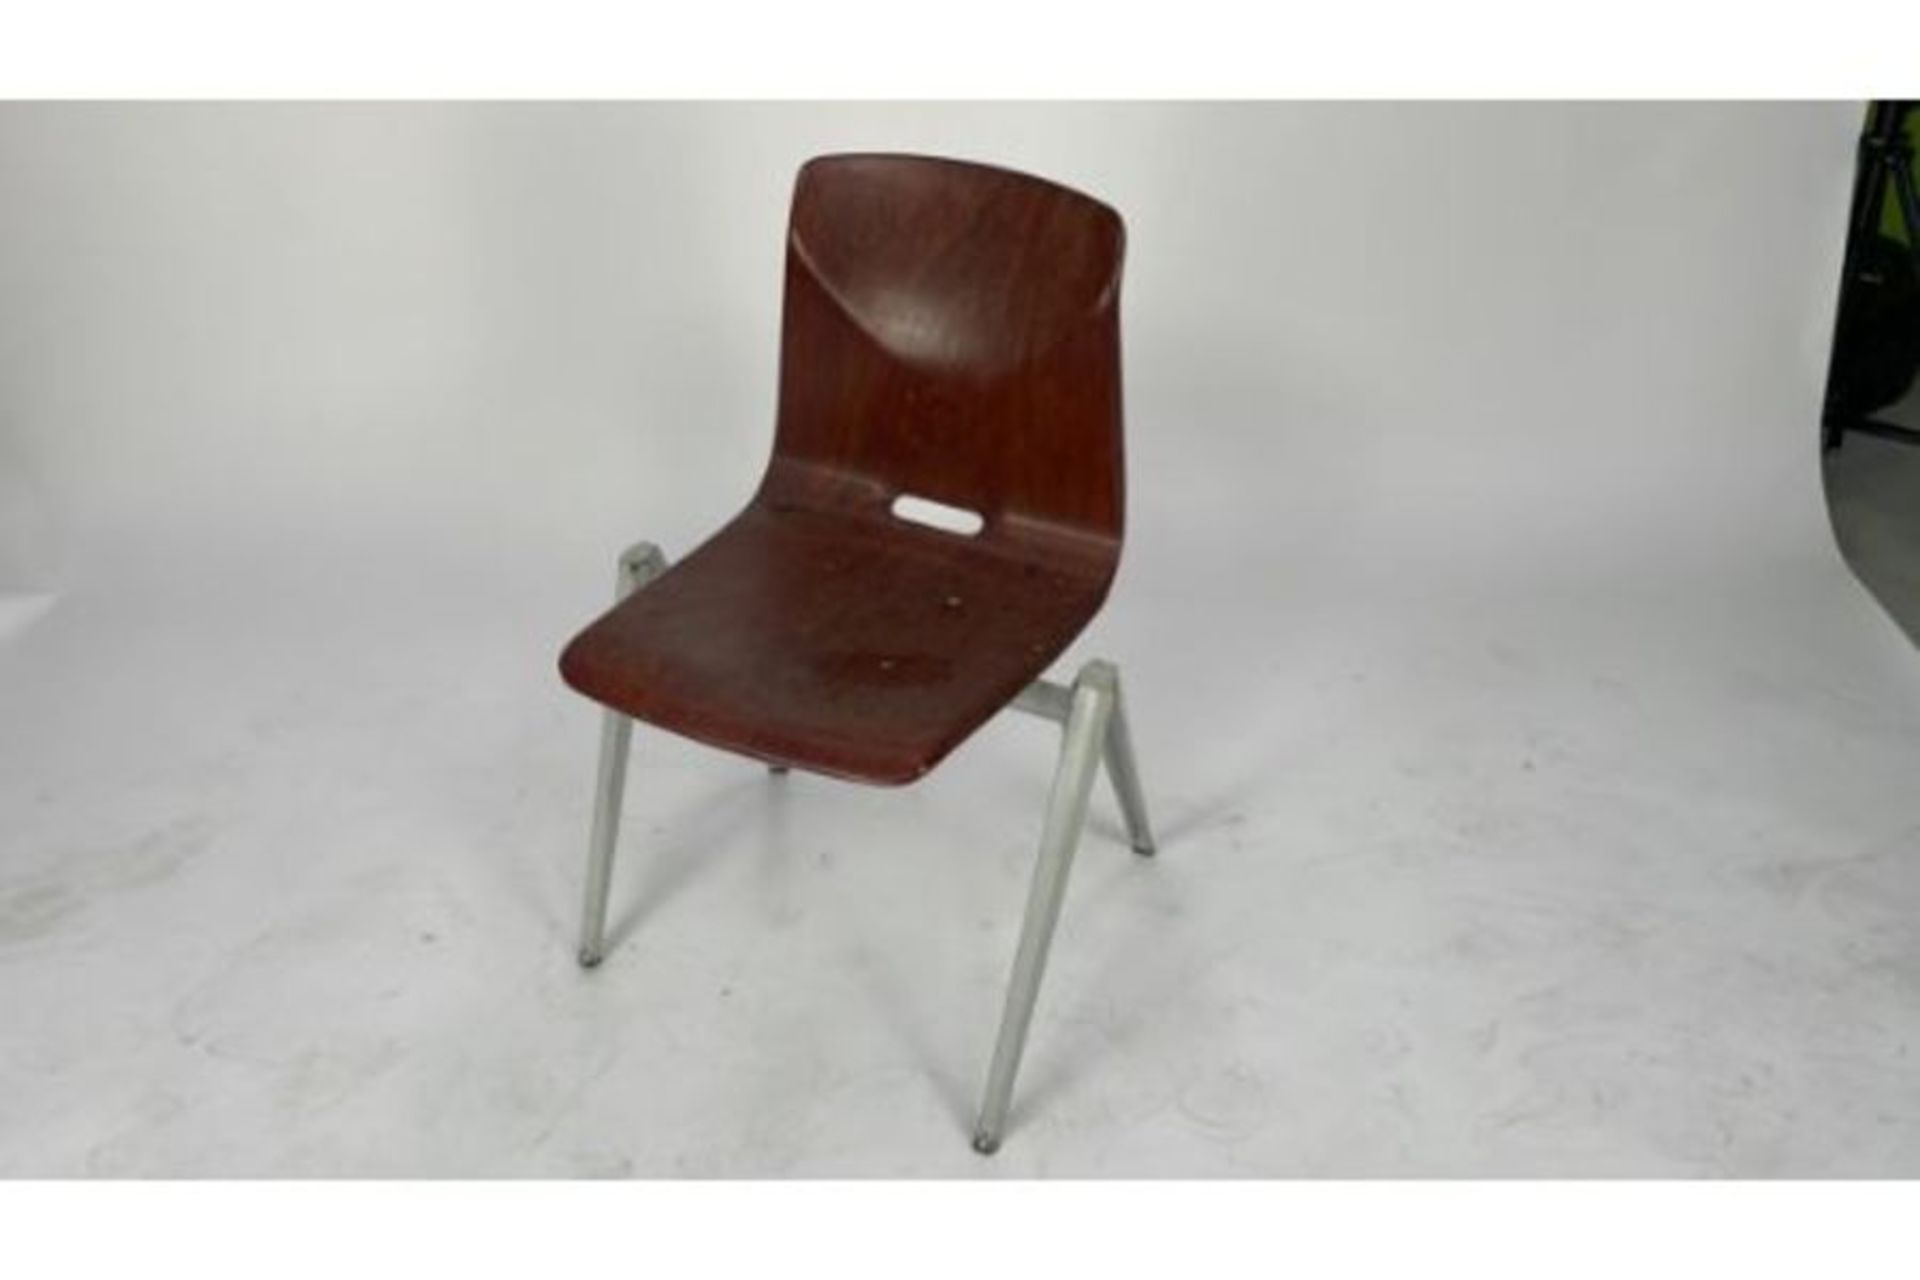 Thur Op Seat Stackable Chair In Mahogany Resin - Image 2 of 2